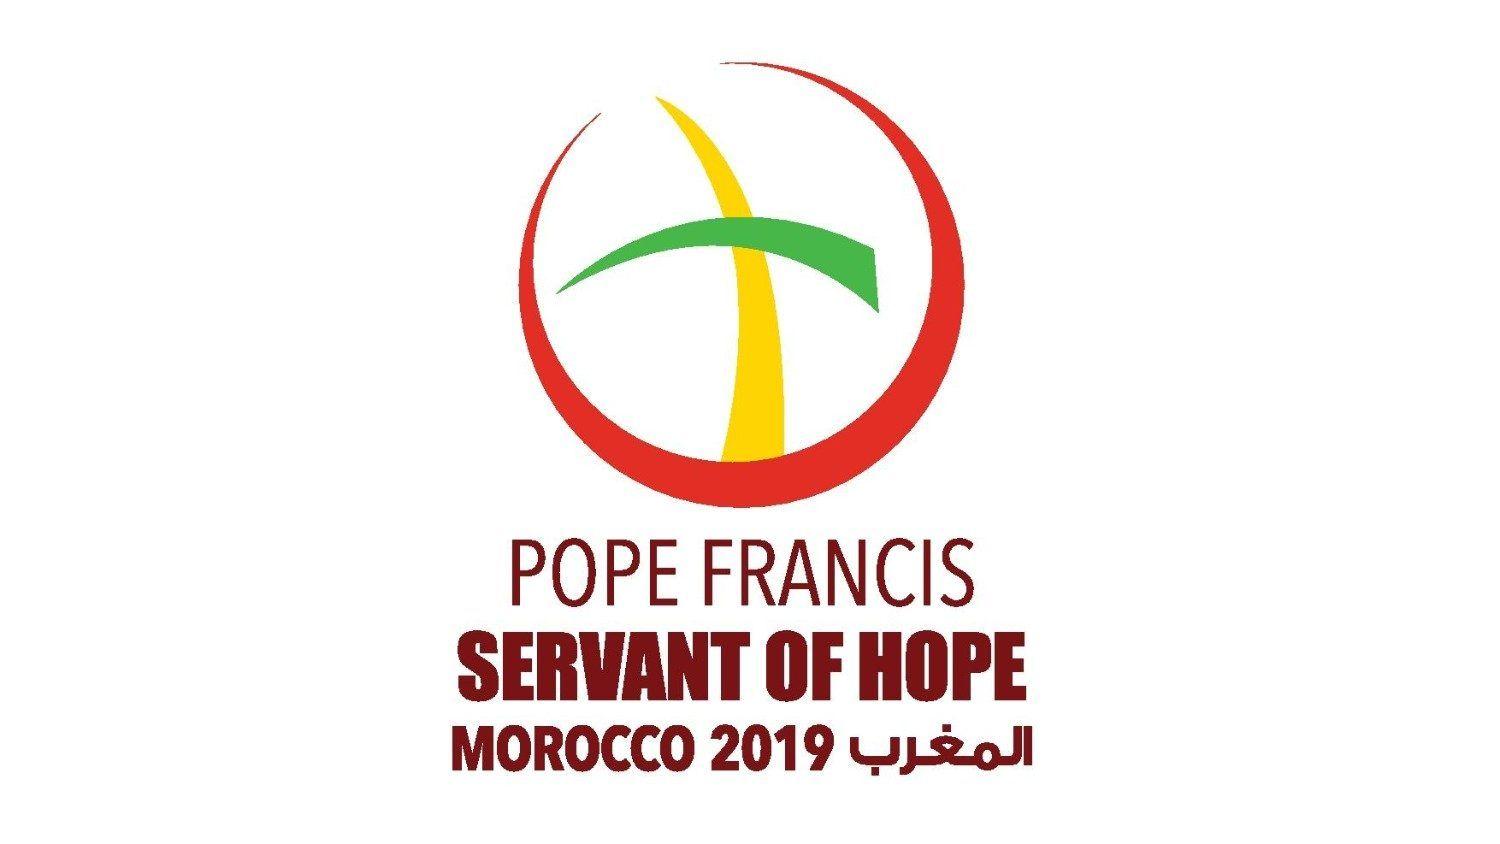 Papal Logo - Vatican releases logo for Pope Francis' visit to Morocco - Vatican News